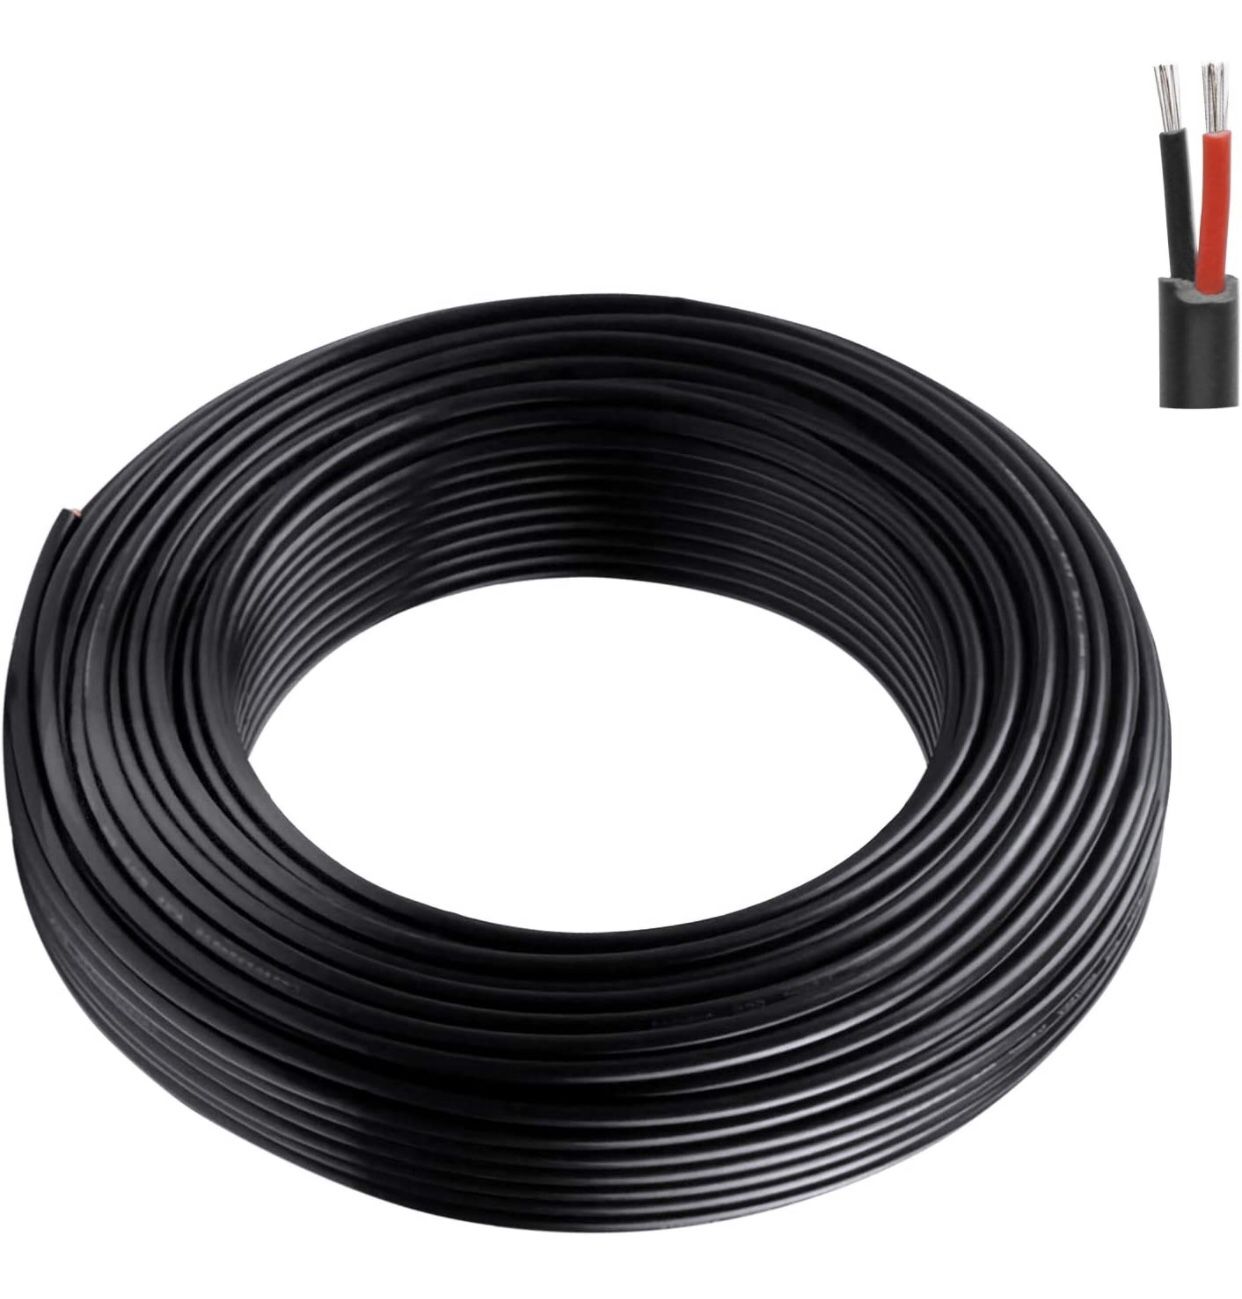 Brand New Electrical Wire 65.6ft 22AWG Conductor Wire, 22 Gauge Black Tinned Copper Hookup Wire, 2 Pin Insulated Solid Core, Flexible Extension Electr